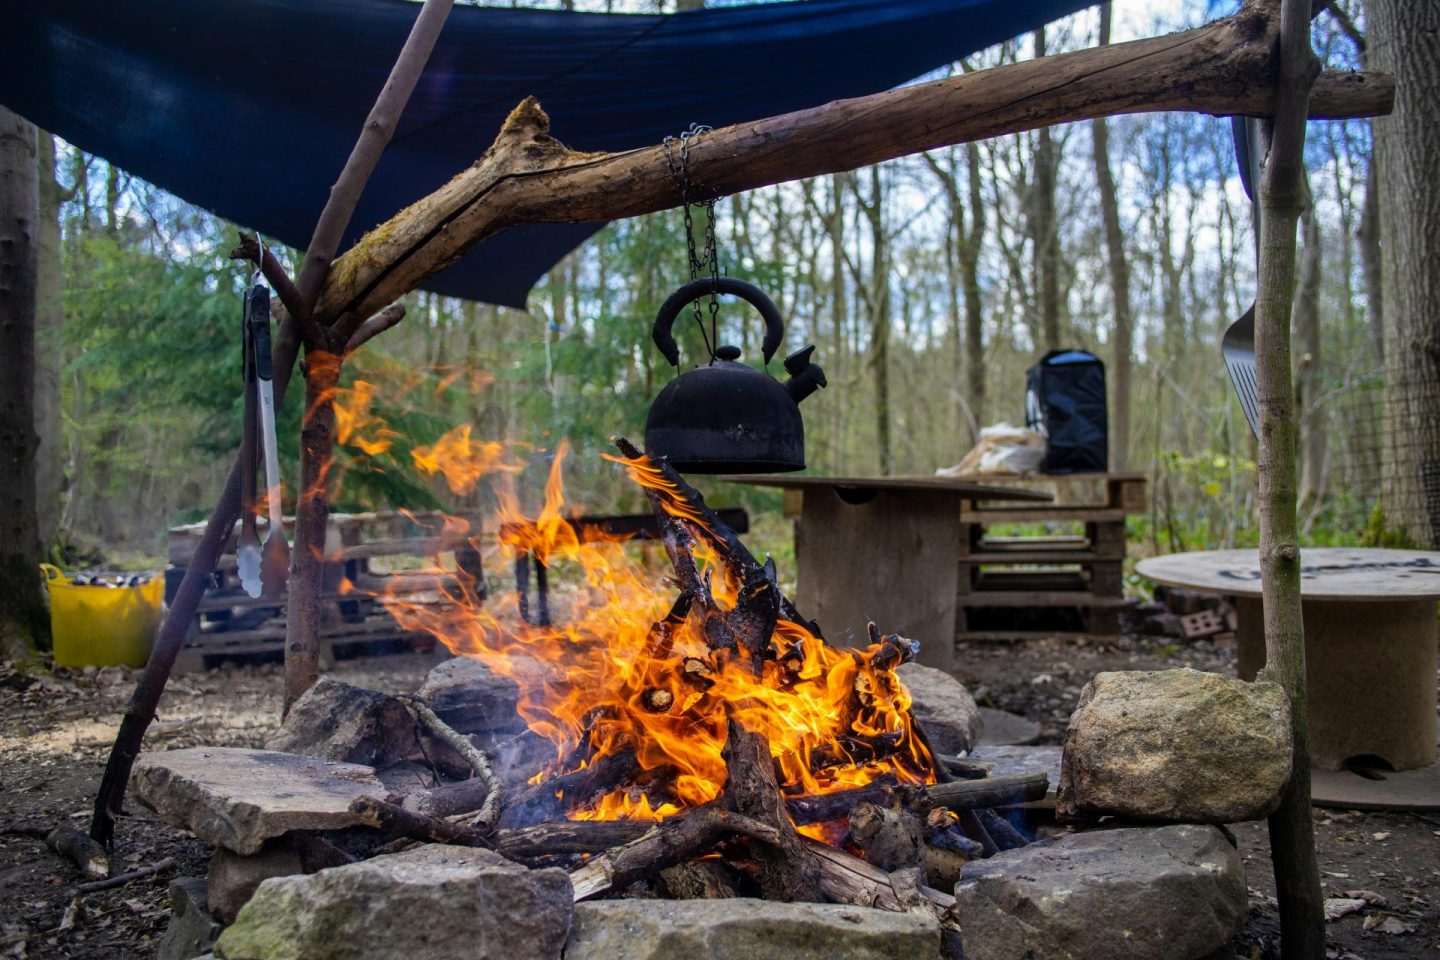 20 of the best easy outdoor recipes to make on your next camping trip